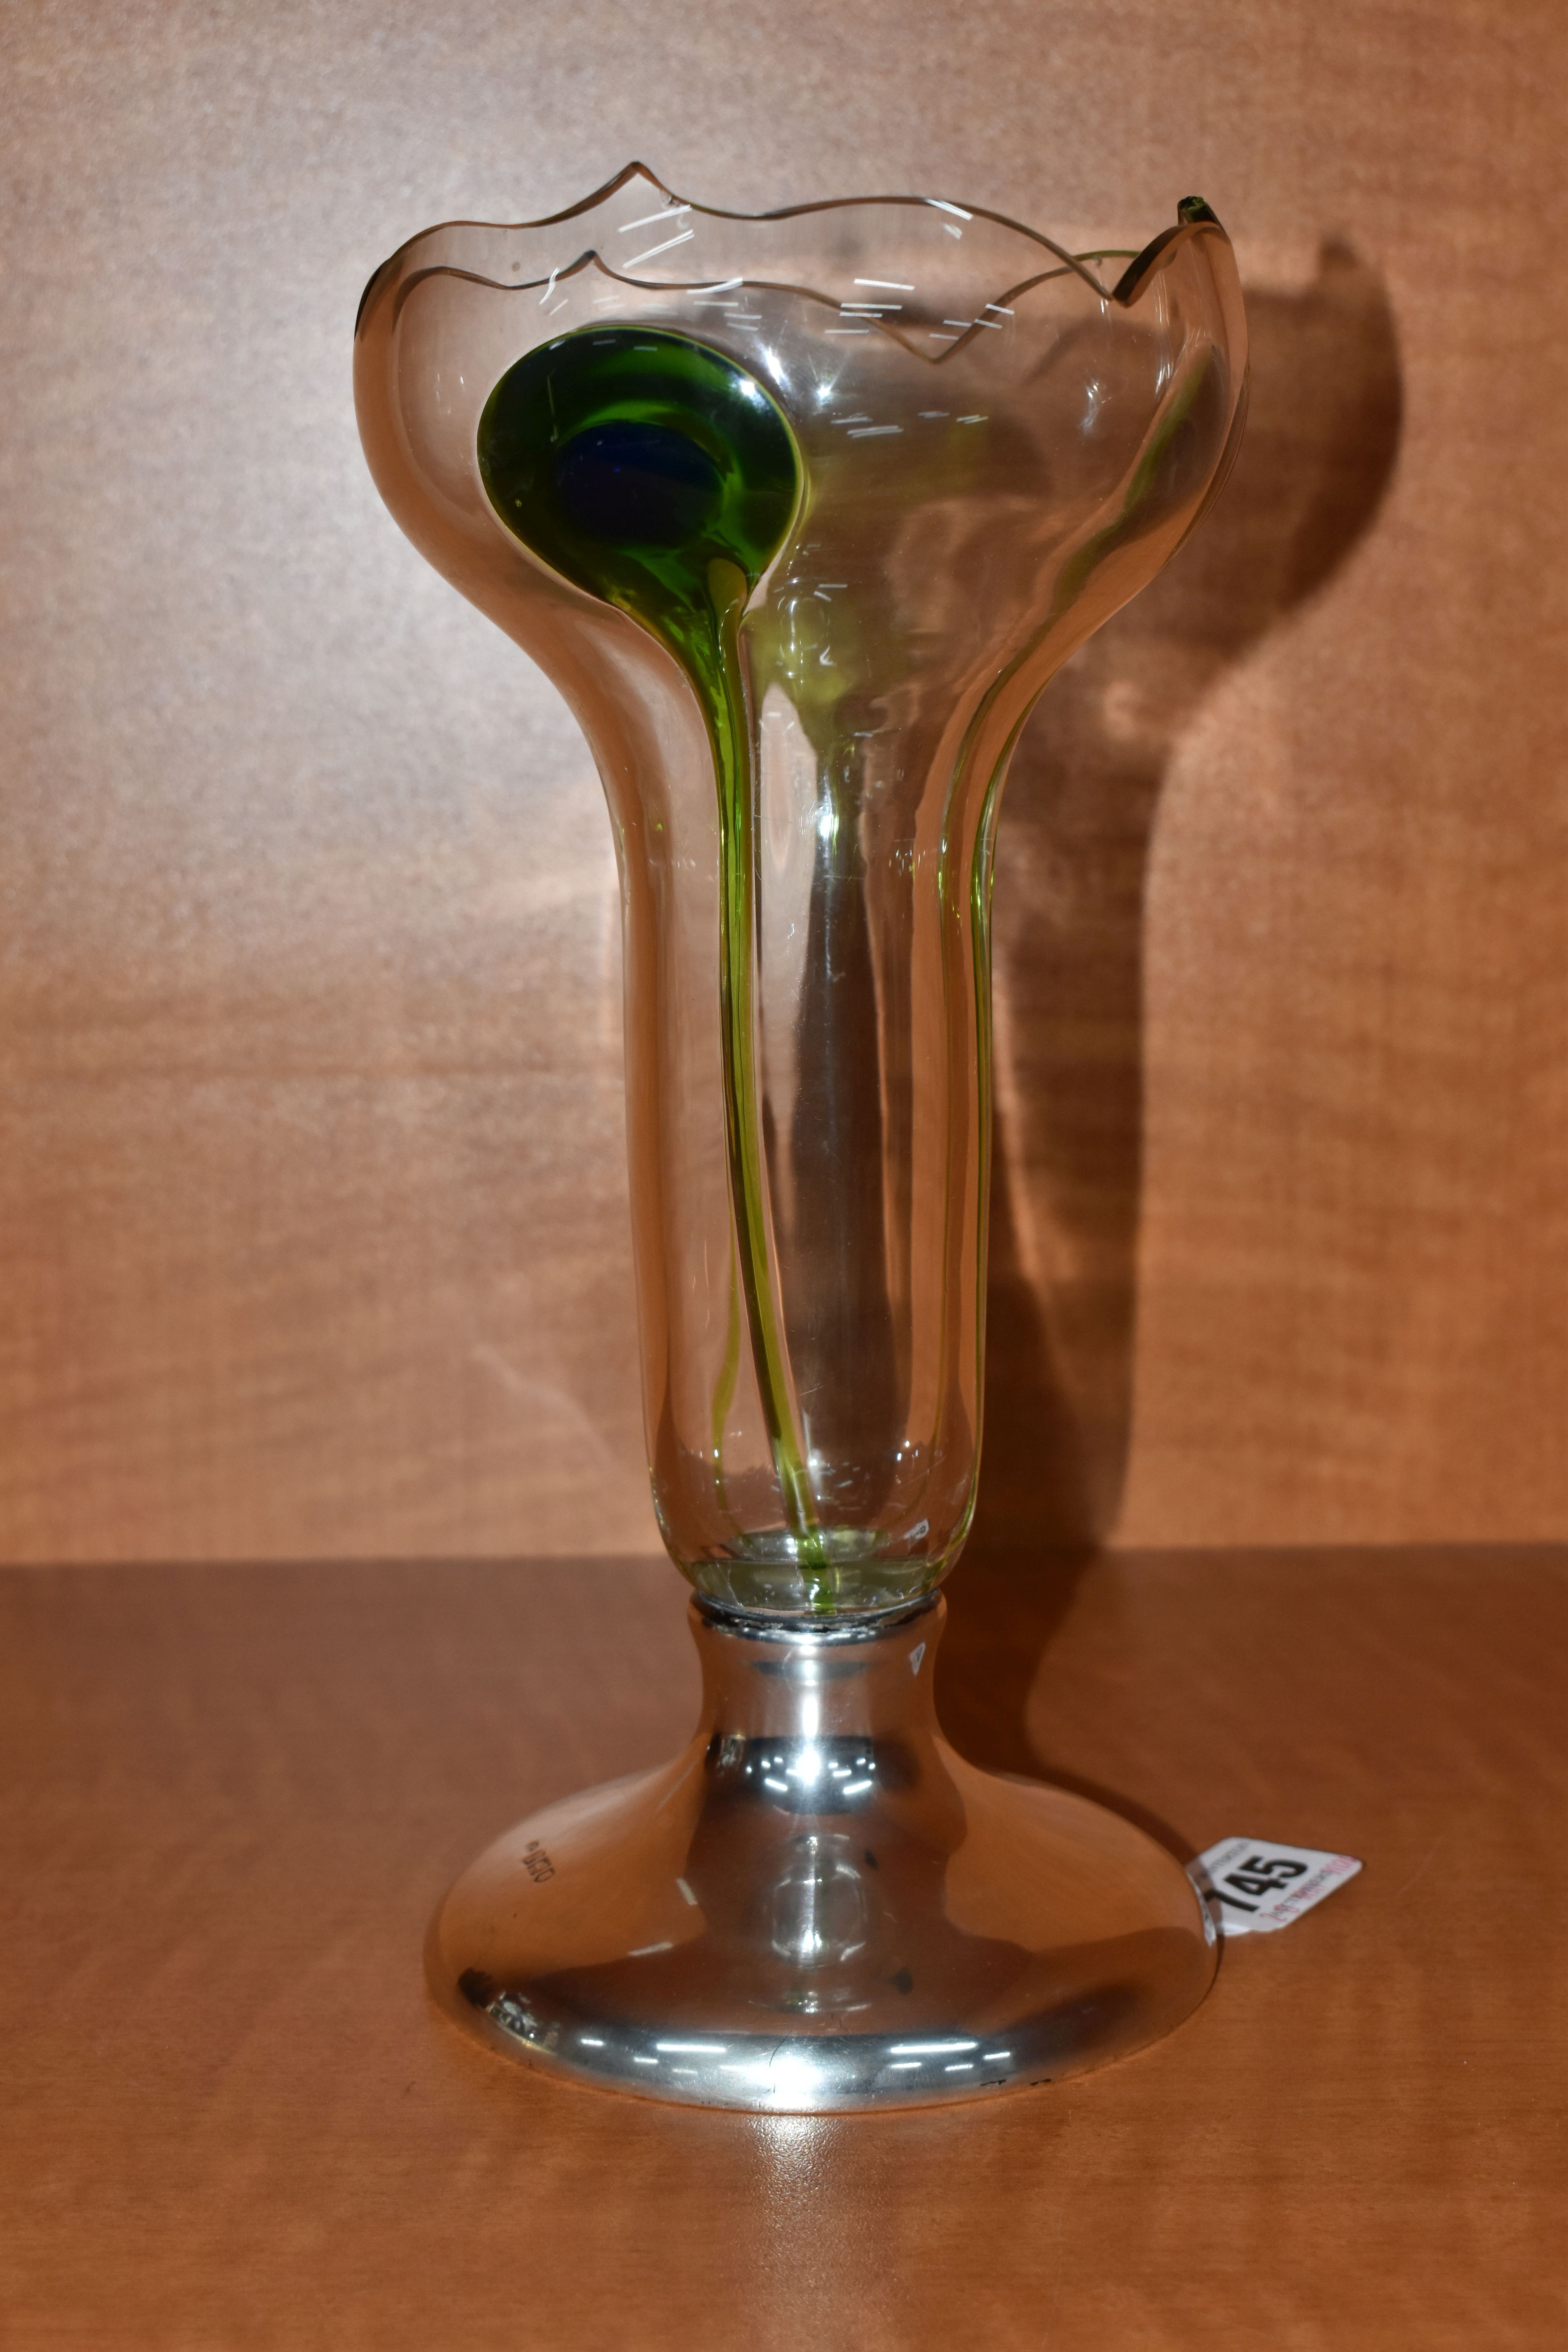 AN ART NOUVEAU SILVER MOUNTED CLEAR GLASS VASE WITH THREE GREEN AND BLUE PEACOCK FEATHER STYLE - Image 4 of 8